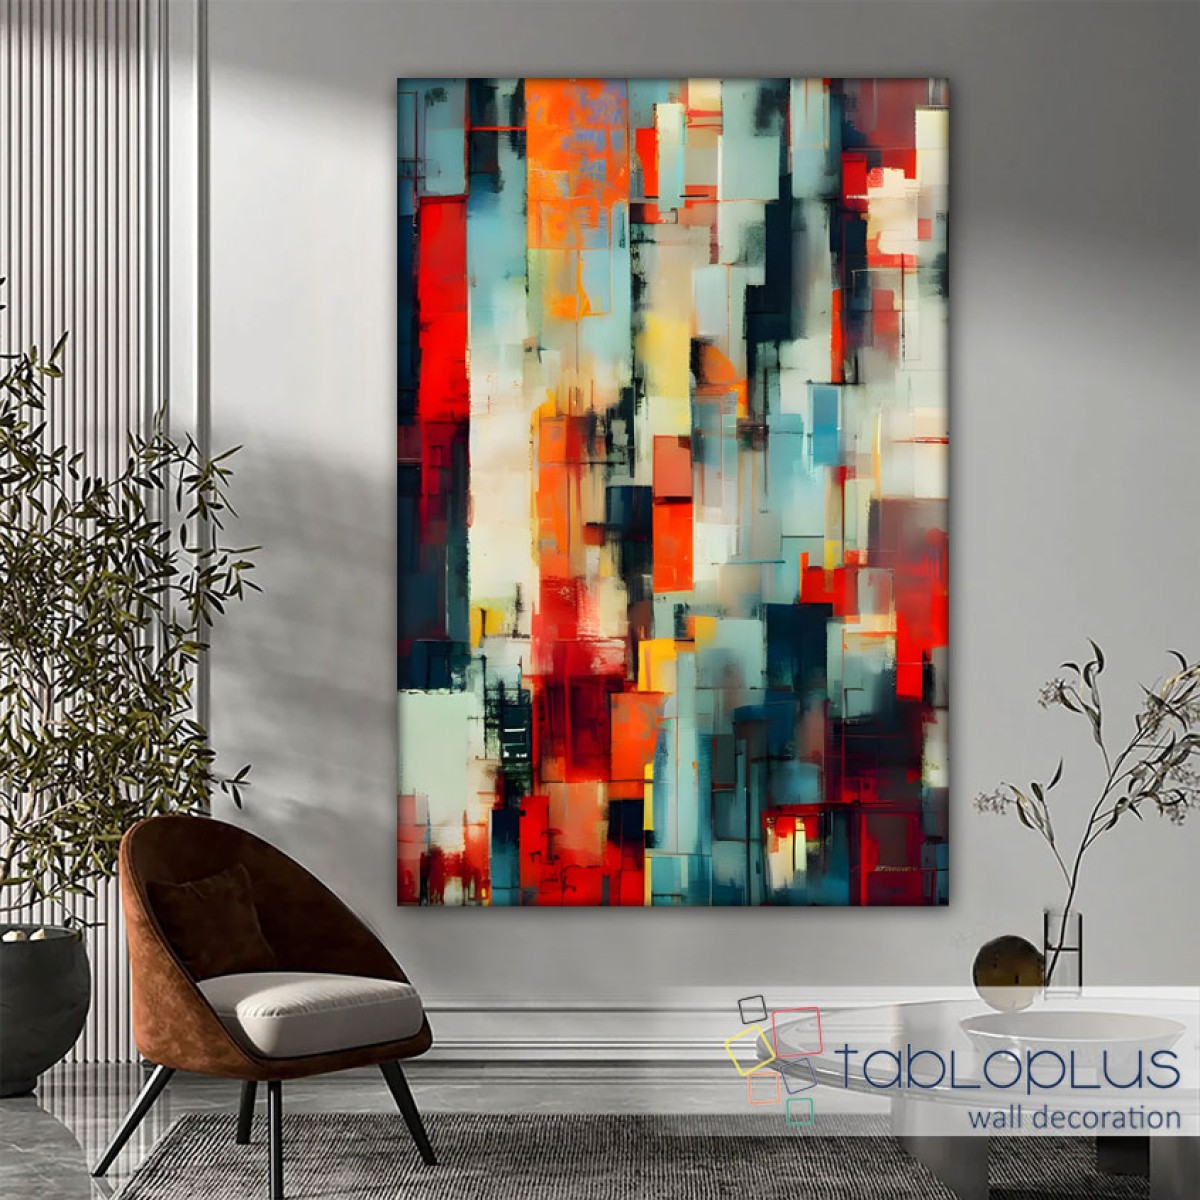 Abstract Blurry Orange Textured Partial Oil Painting